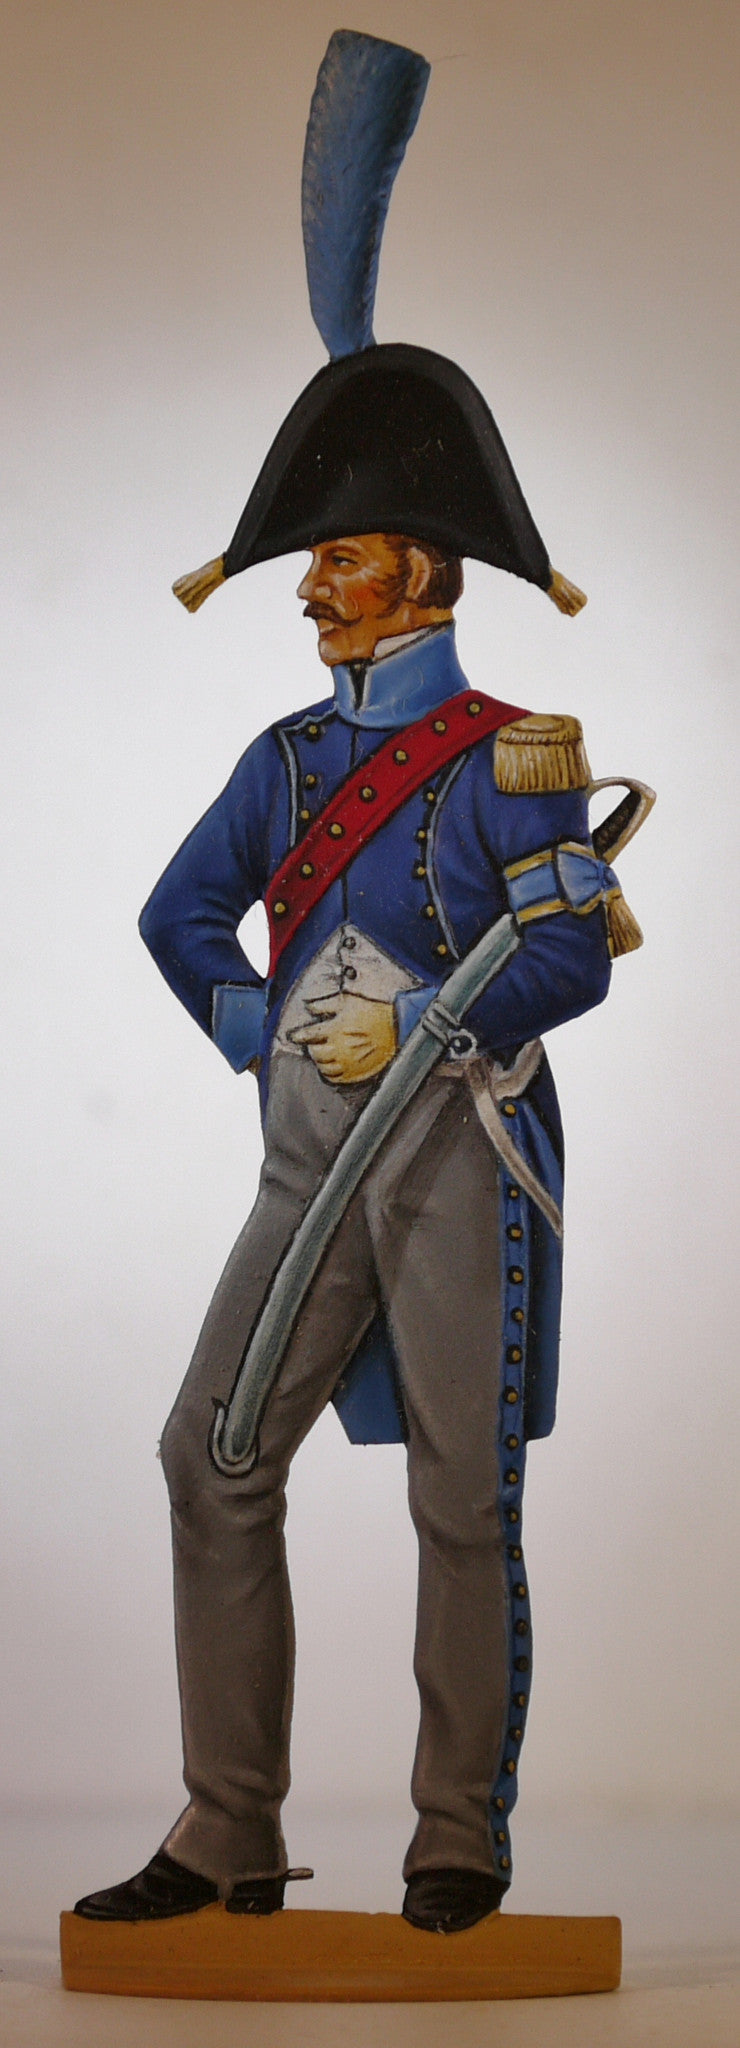 A.d.C. of Brigadier General, campaign dress. - Glorious Empires-Historical Miniatures  